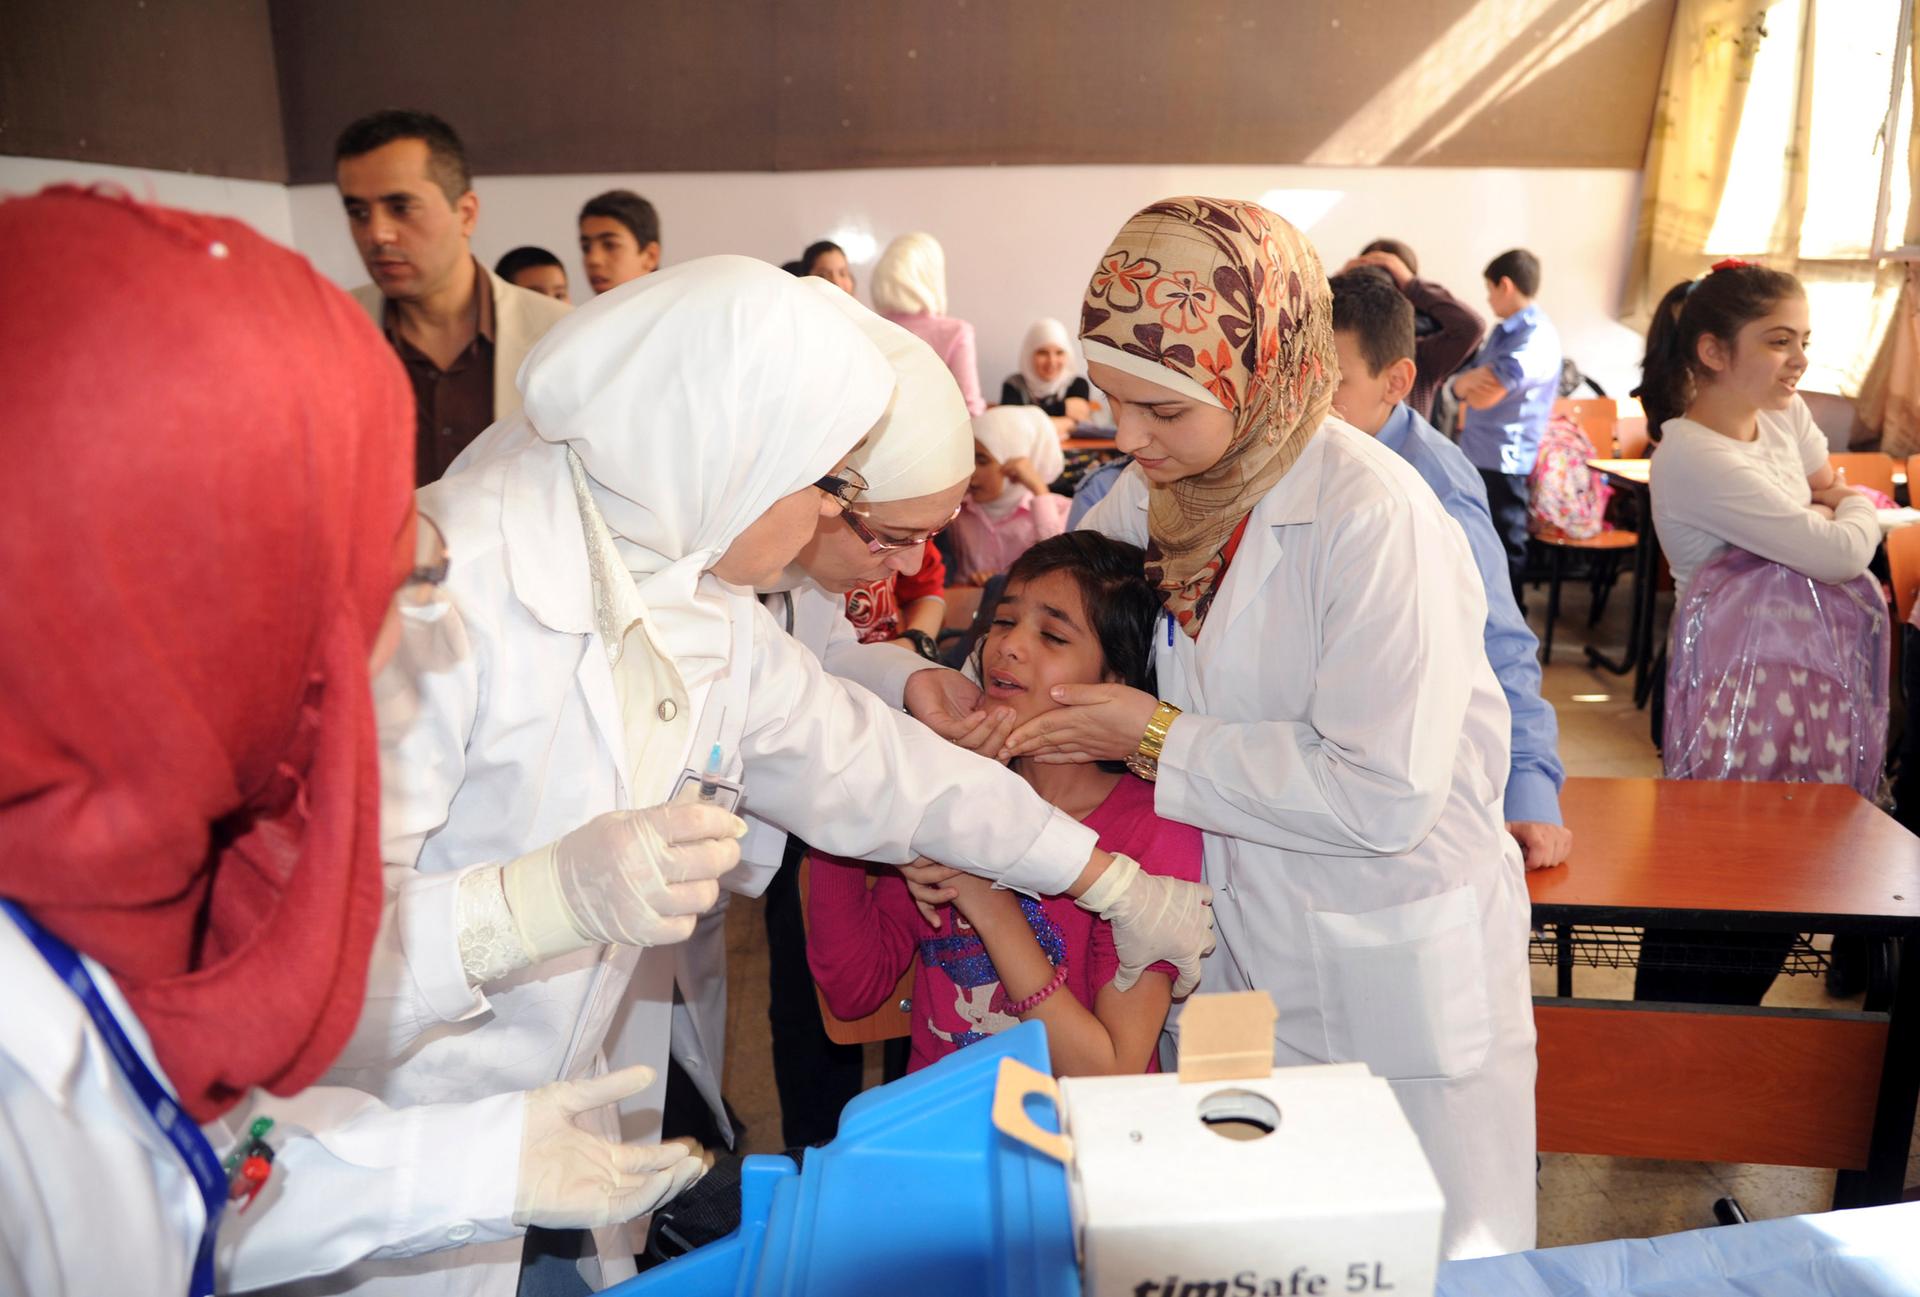 Syrian health workers administer polio vaccination to a girl at a school in Damascus, in this file photo taken by Syria's national news agency SANA in October.